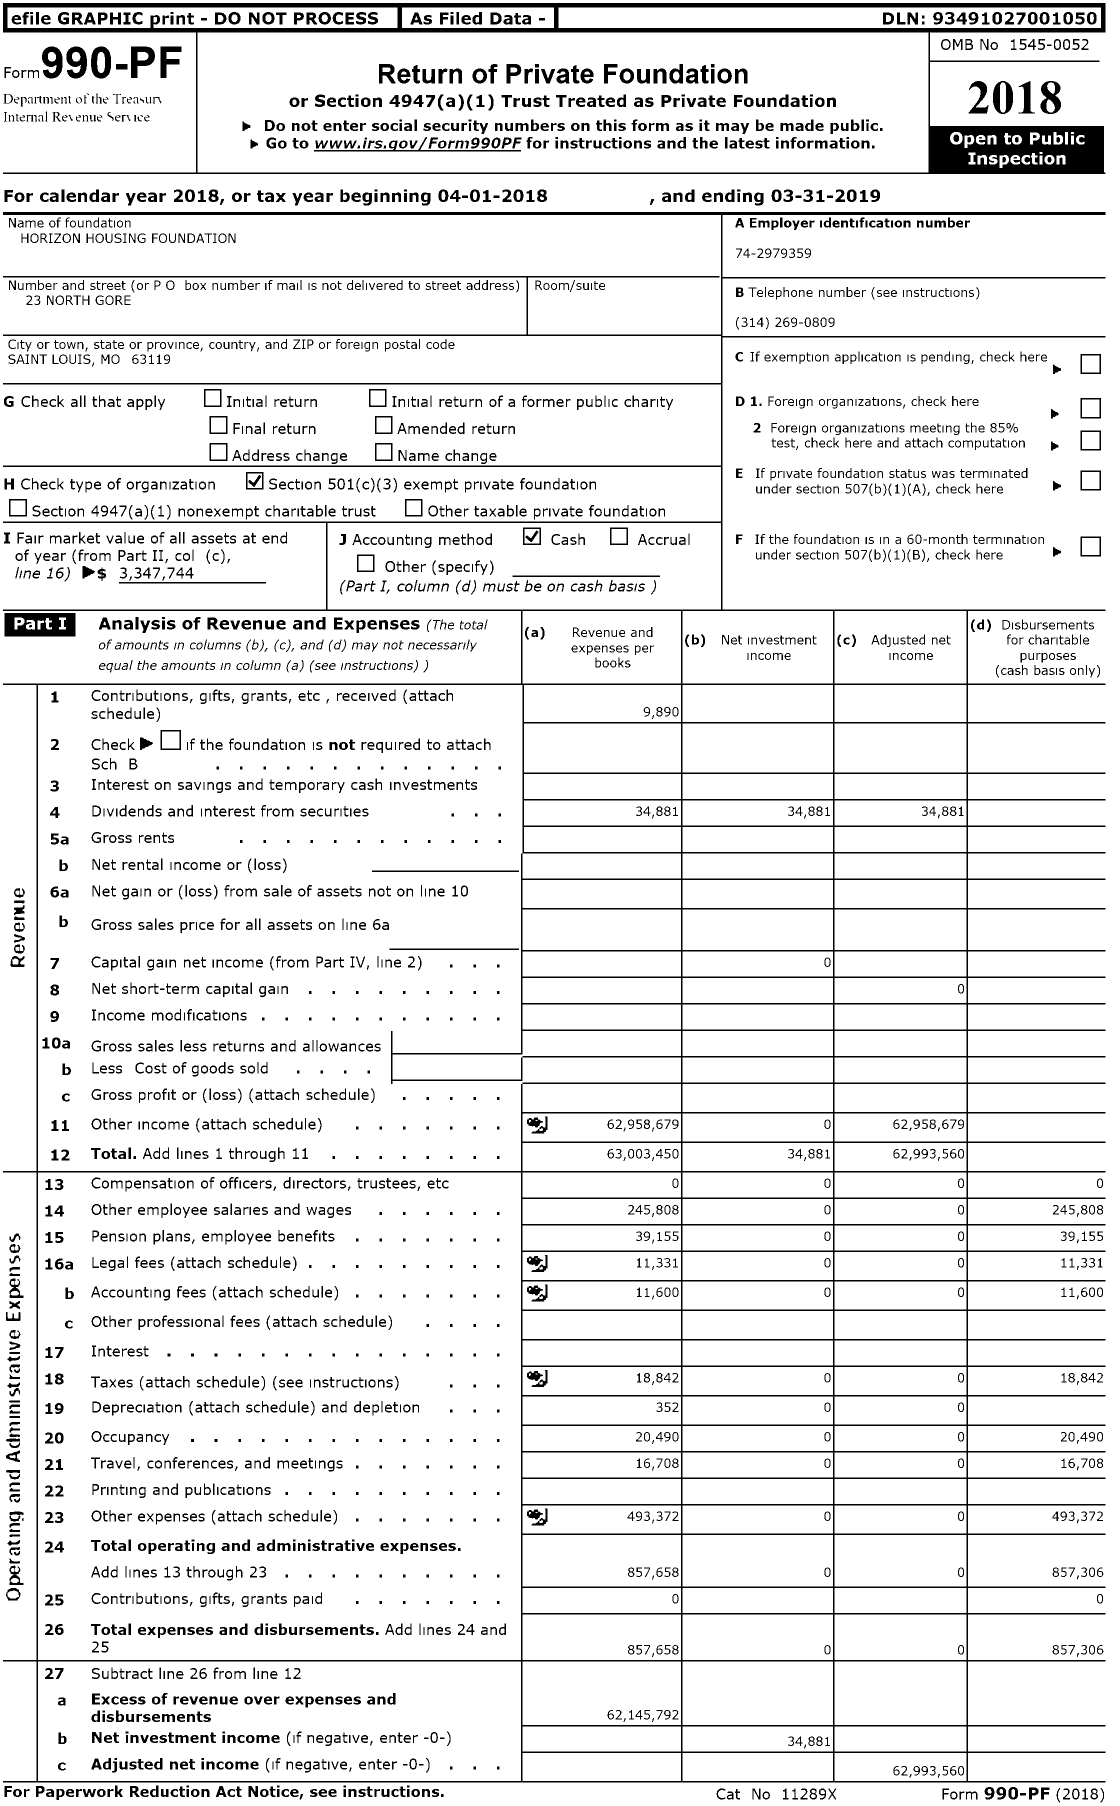 Image of first page of 2018 Form 990PR for Horizon Housing Foundation (HHF)